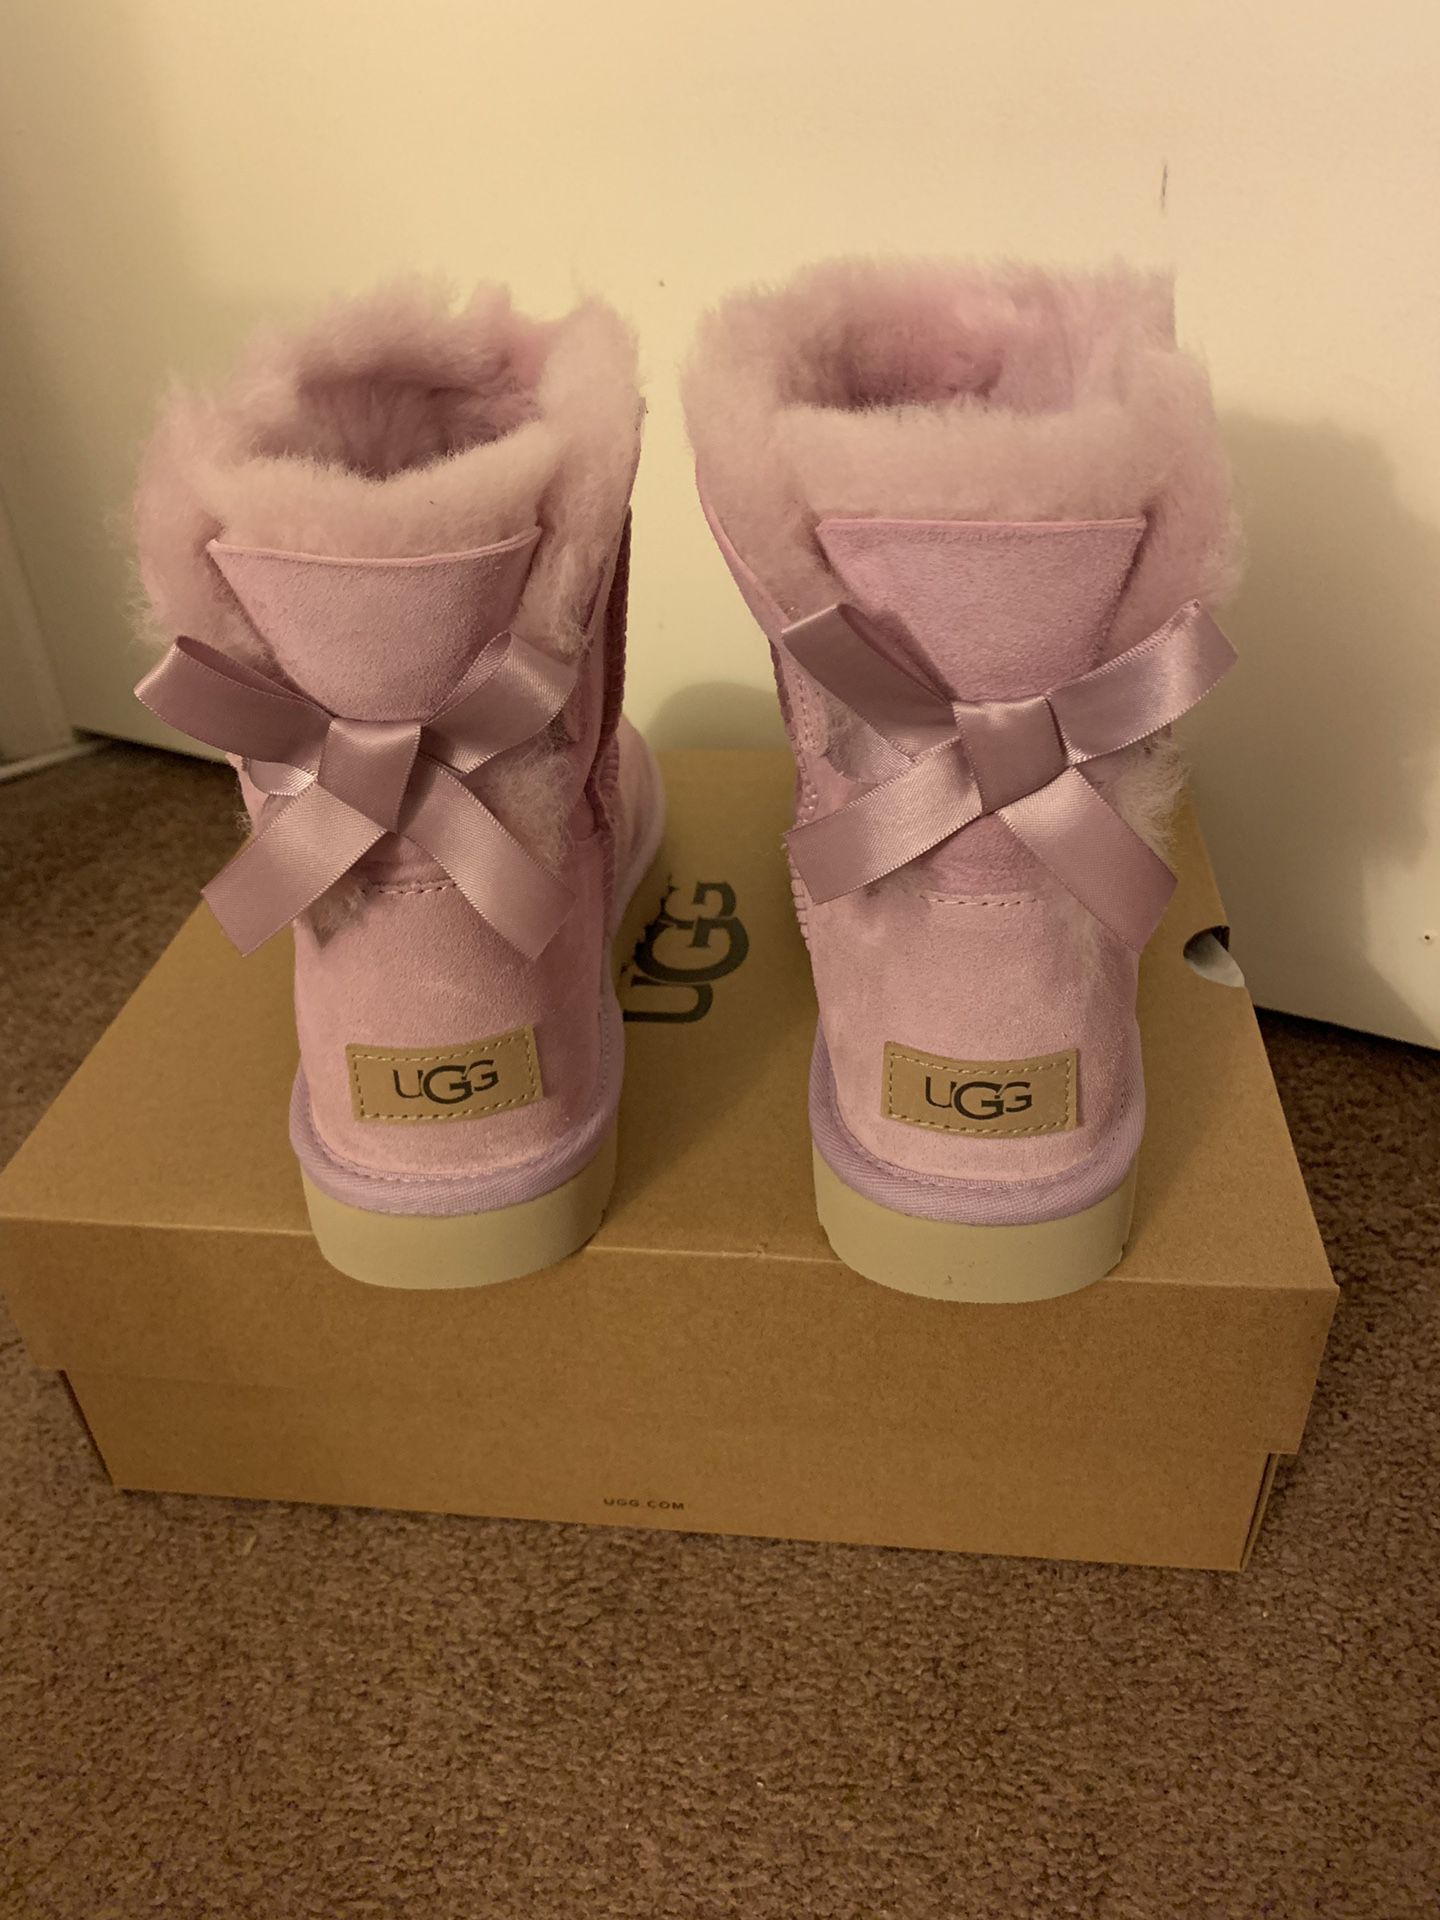 100% Authentic Brand New in Box UGG Mini Bailey Bow II Boots / Women size 7 and Women size 10 / Color: Aster Twinface